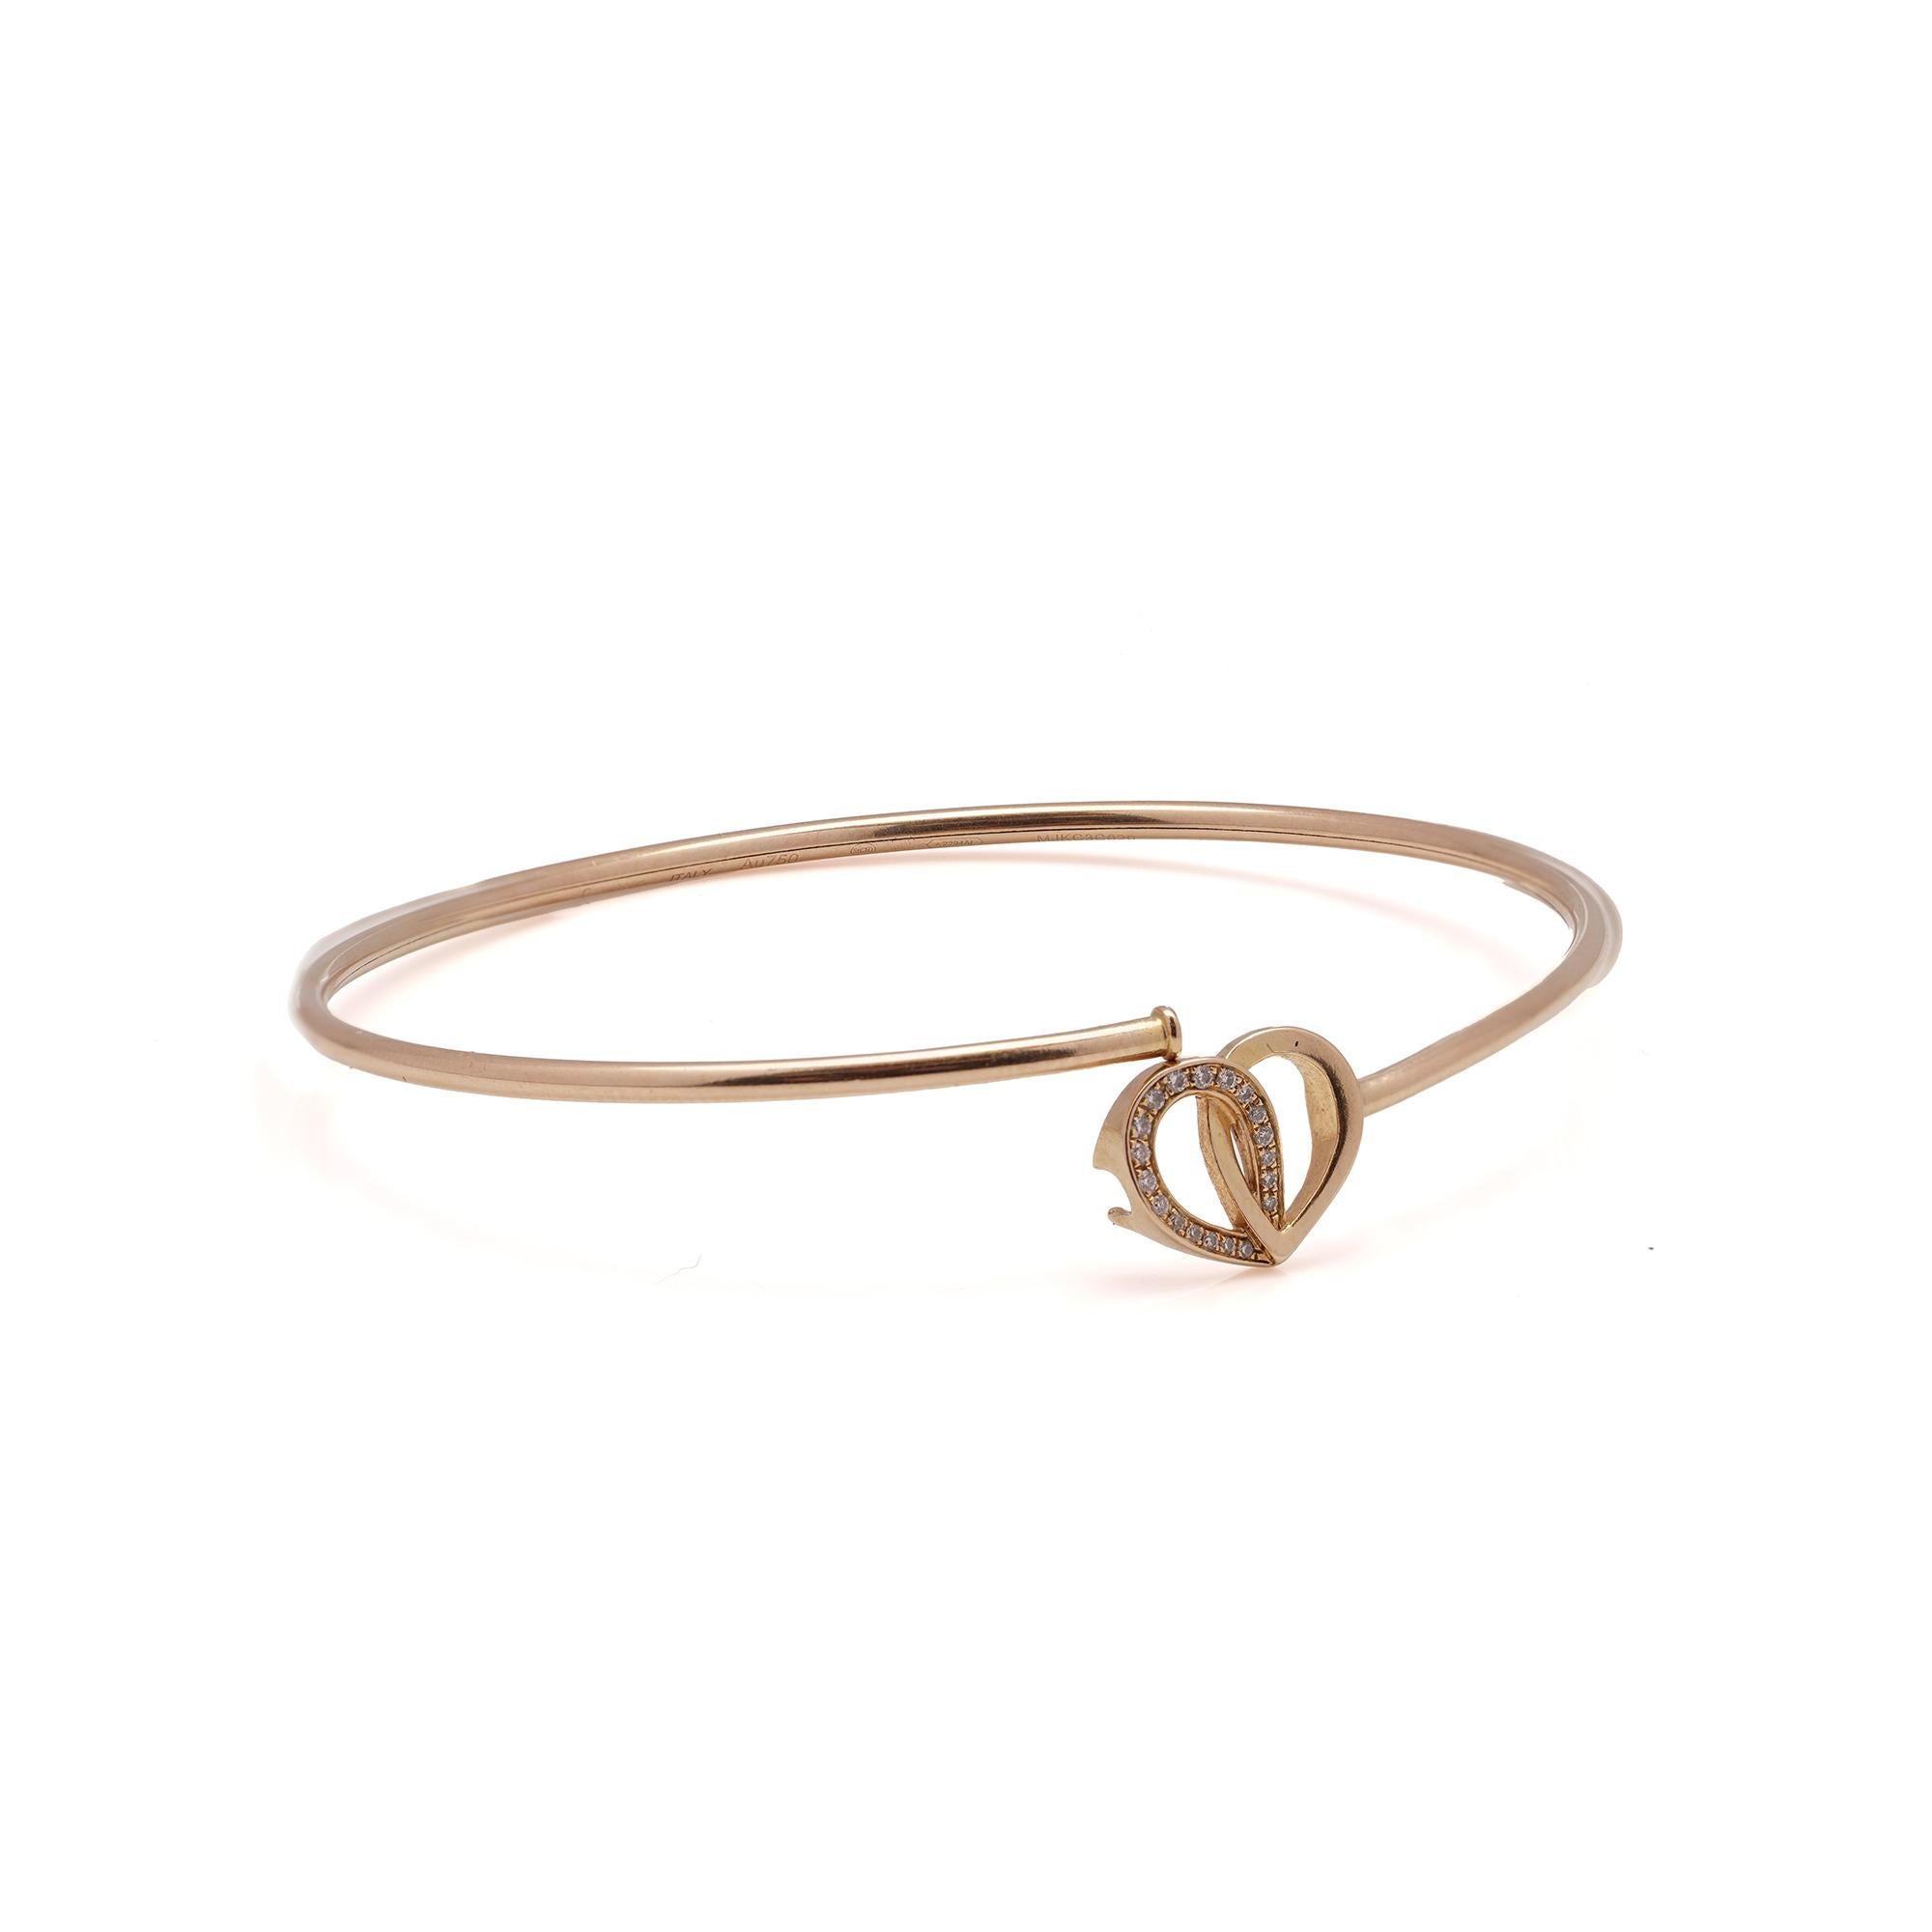 Montblanc 18kt pink gold Valentine's day collection heart-shaped bangle with diamonds. 
Made in Italy, After 2000.
The rose petals are intertwined to form a heart shape. 
Fully Hallmarked with serial number, 750 mark, Italian assay marks.